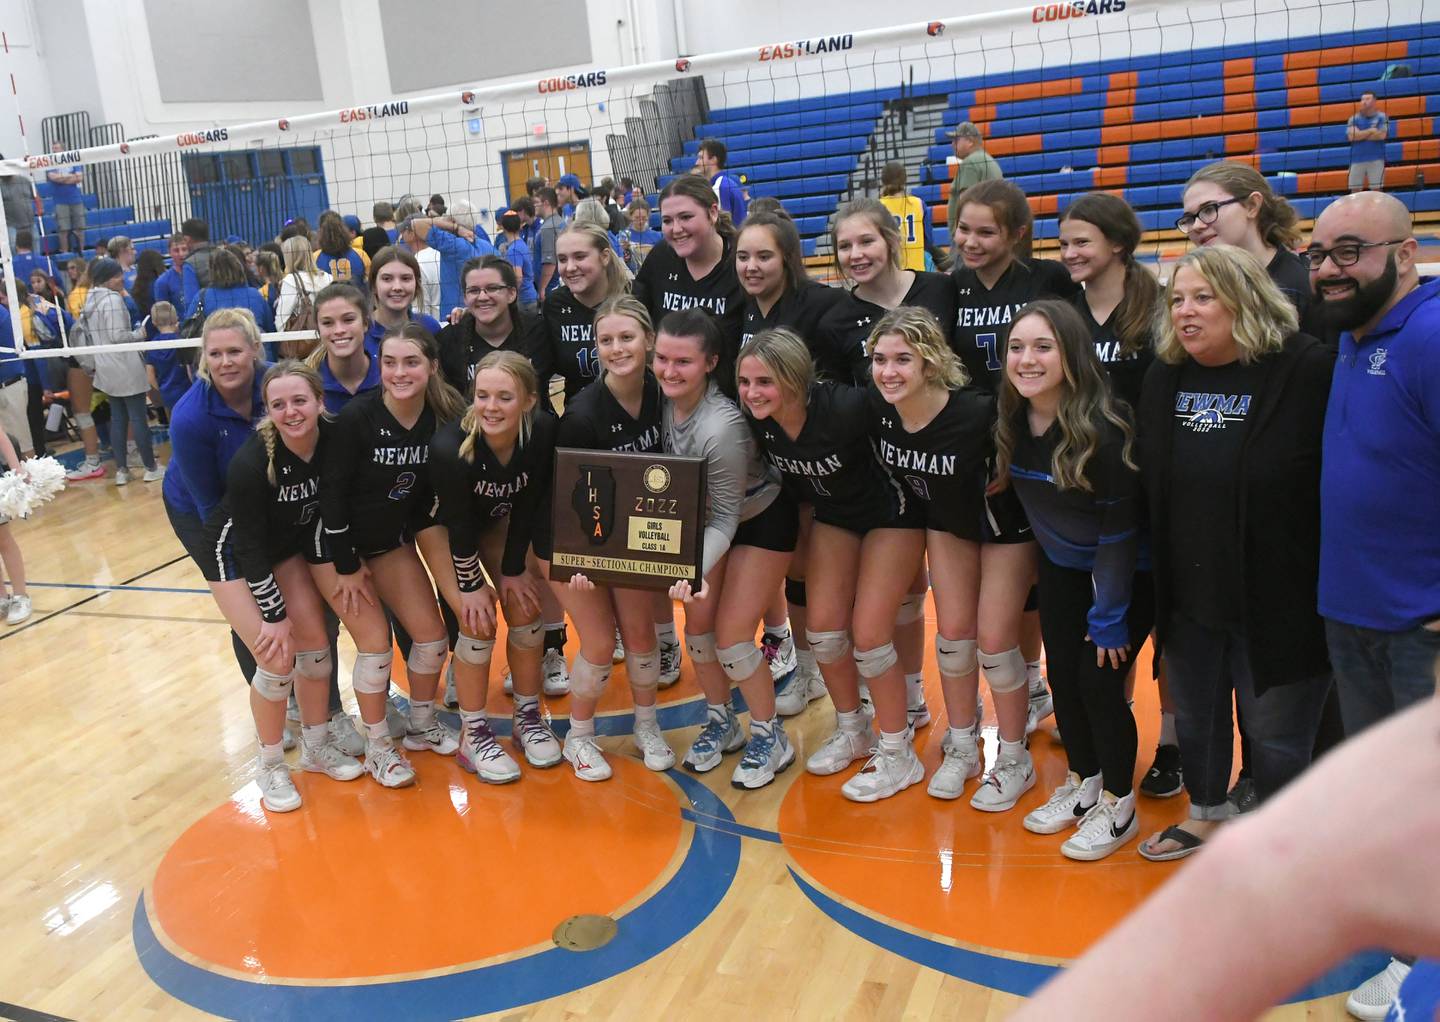 Newman players pose with their plaque after winning the 1A Eastland Supersectional in Lanark on Friday, Nov.4. Newman won the match to advance to the state finals next week.